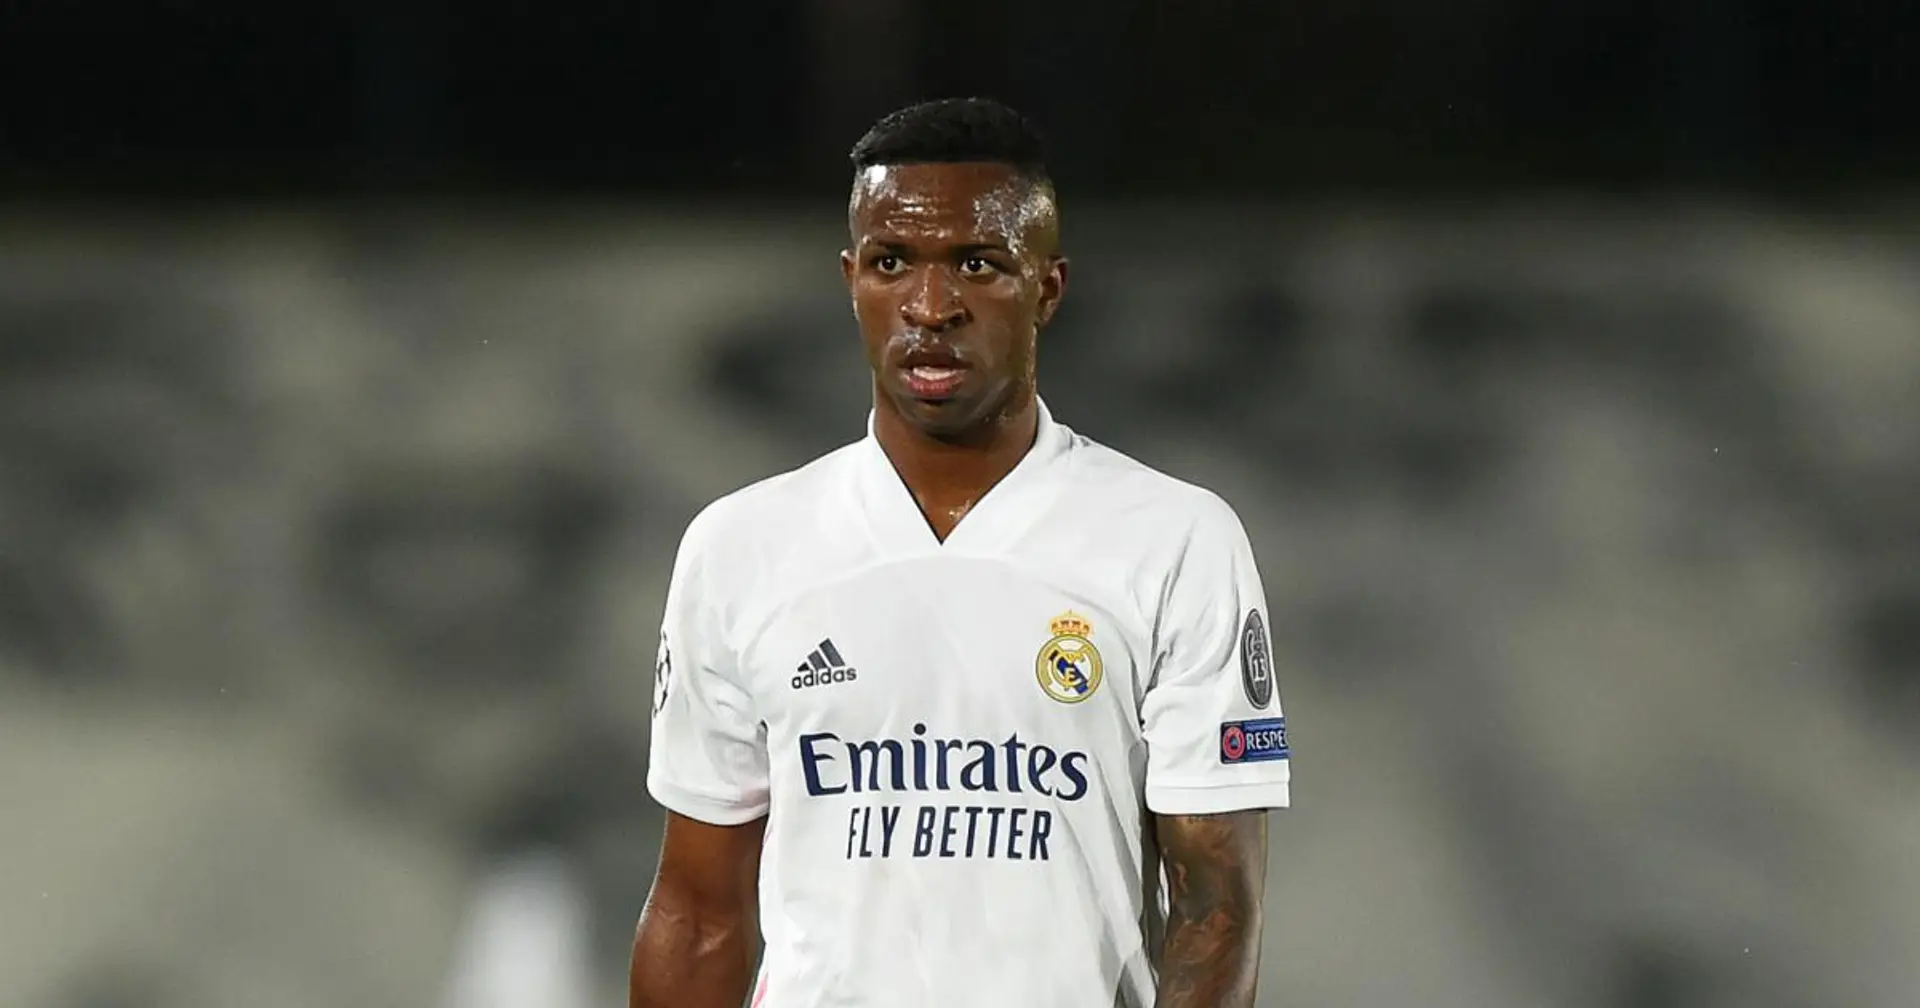 'I question his football IQ as his decision-making is always bad': Madrid fan explains what's wrong with Vinicius